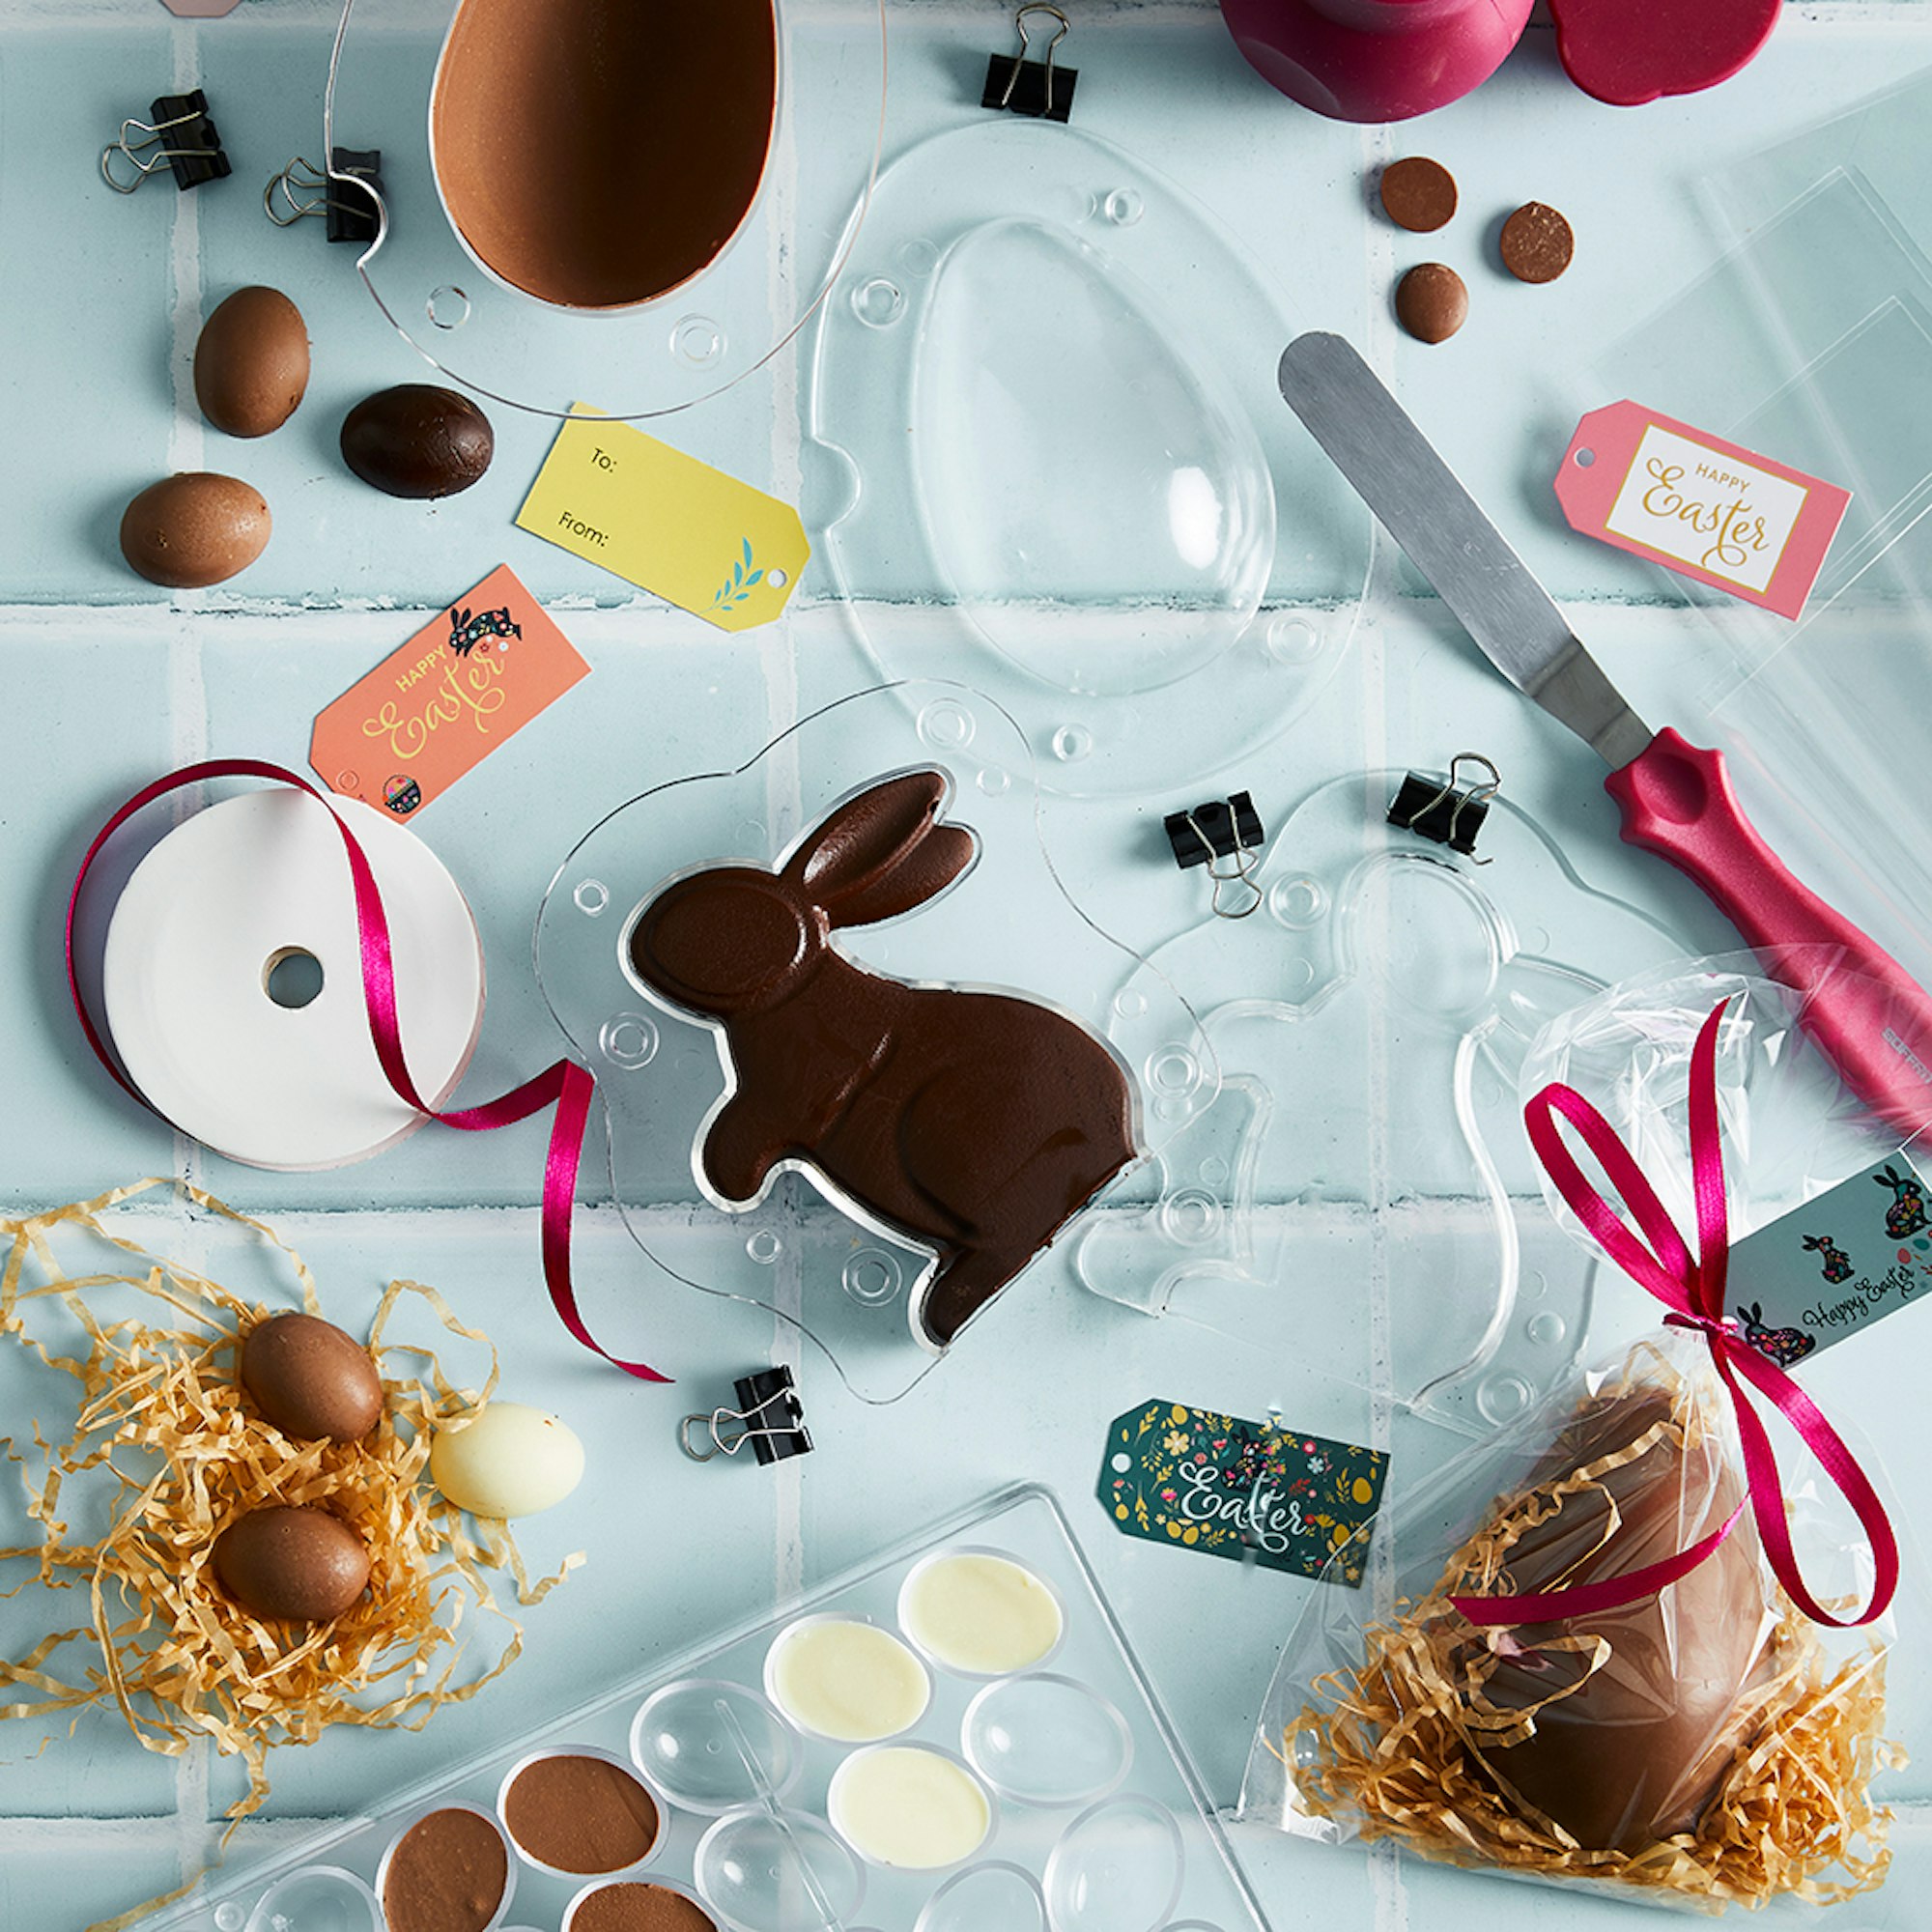 Chocolate Easter Bunny & Easter Eggs Recipe